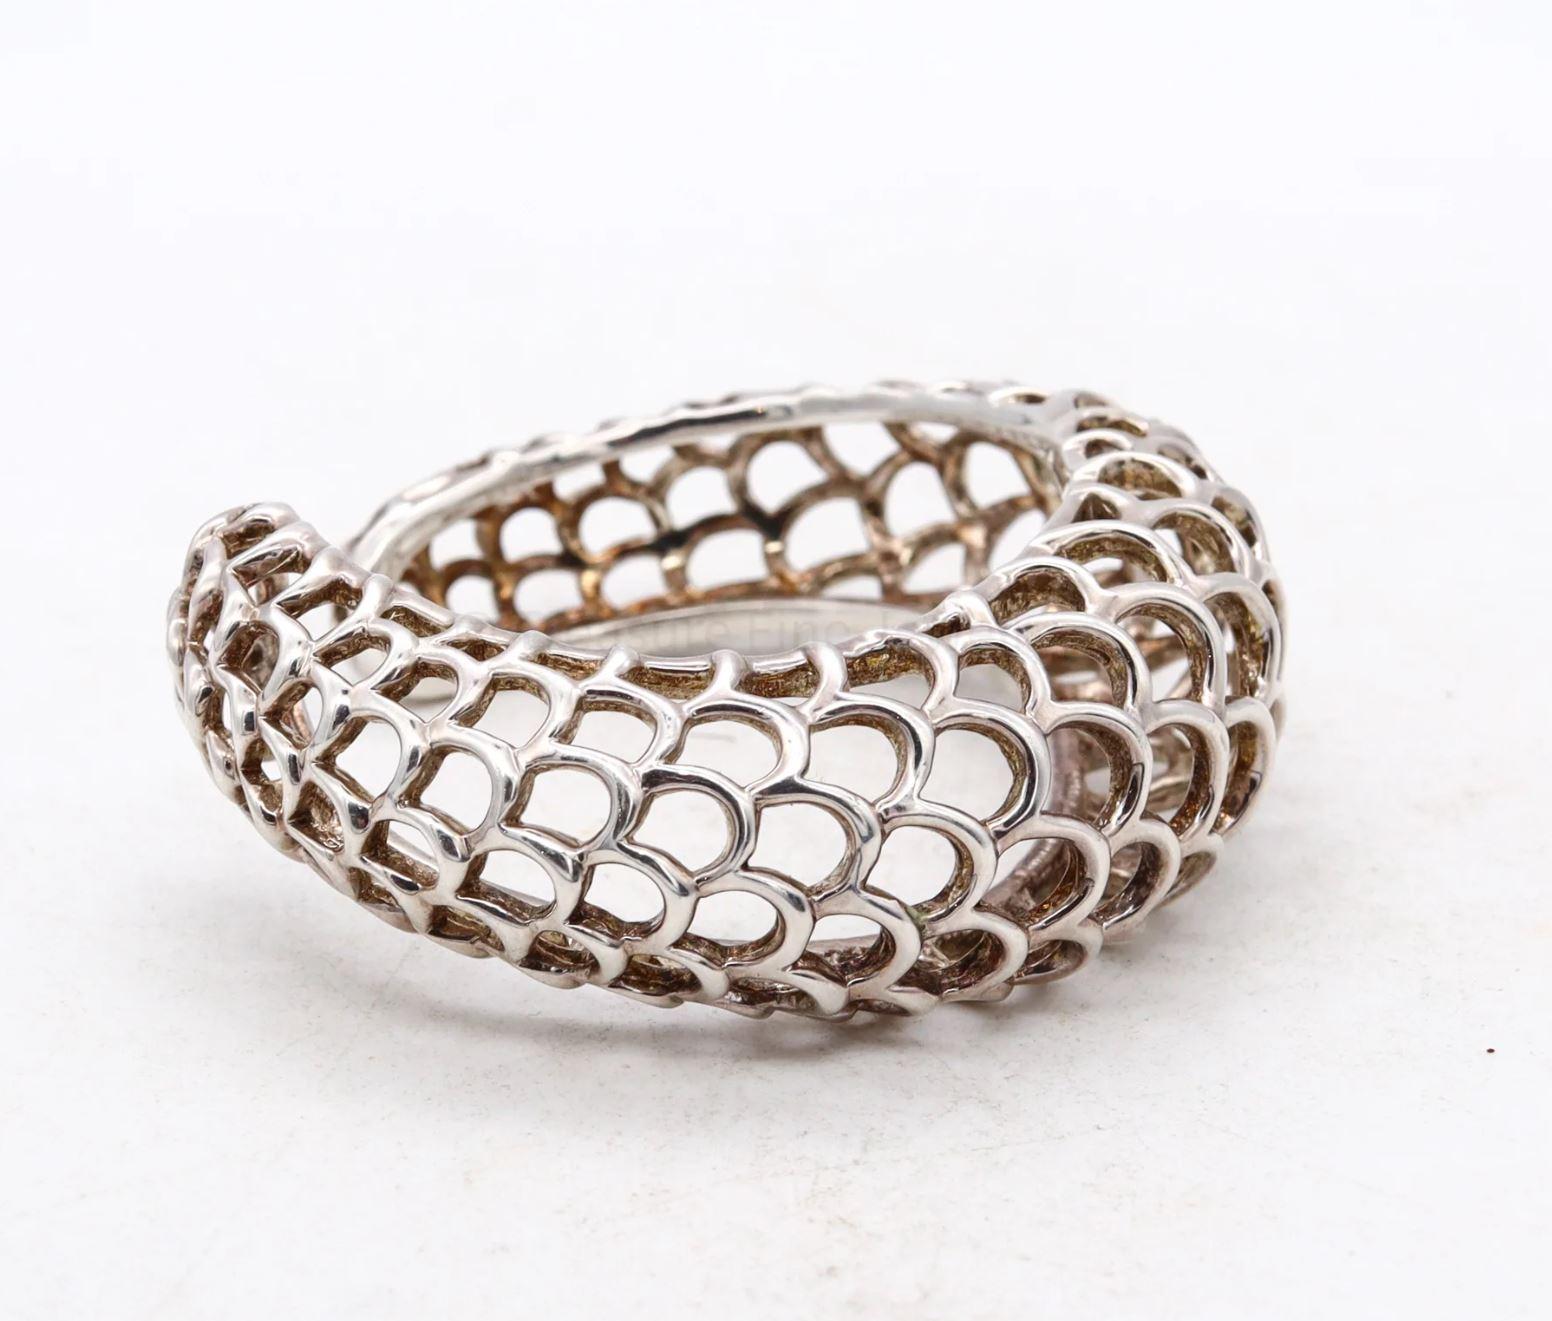 A geometric wired cuff designed by Angela Cummings.

Beautiful aerodynamic wired cuff bracelet, created by Angela Cummings at her studio in New York City back in the 1991. It was carefully crafted in solid .925/,999 sterling silver with high